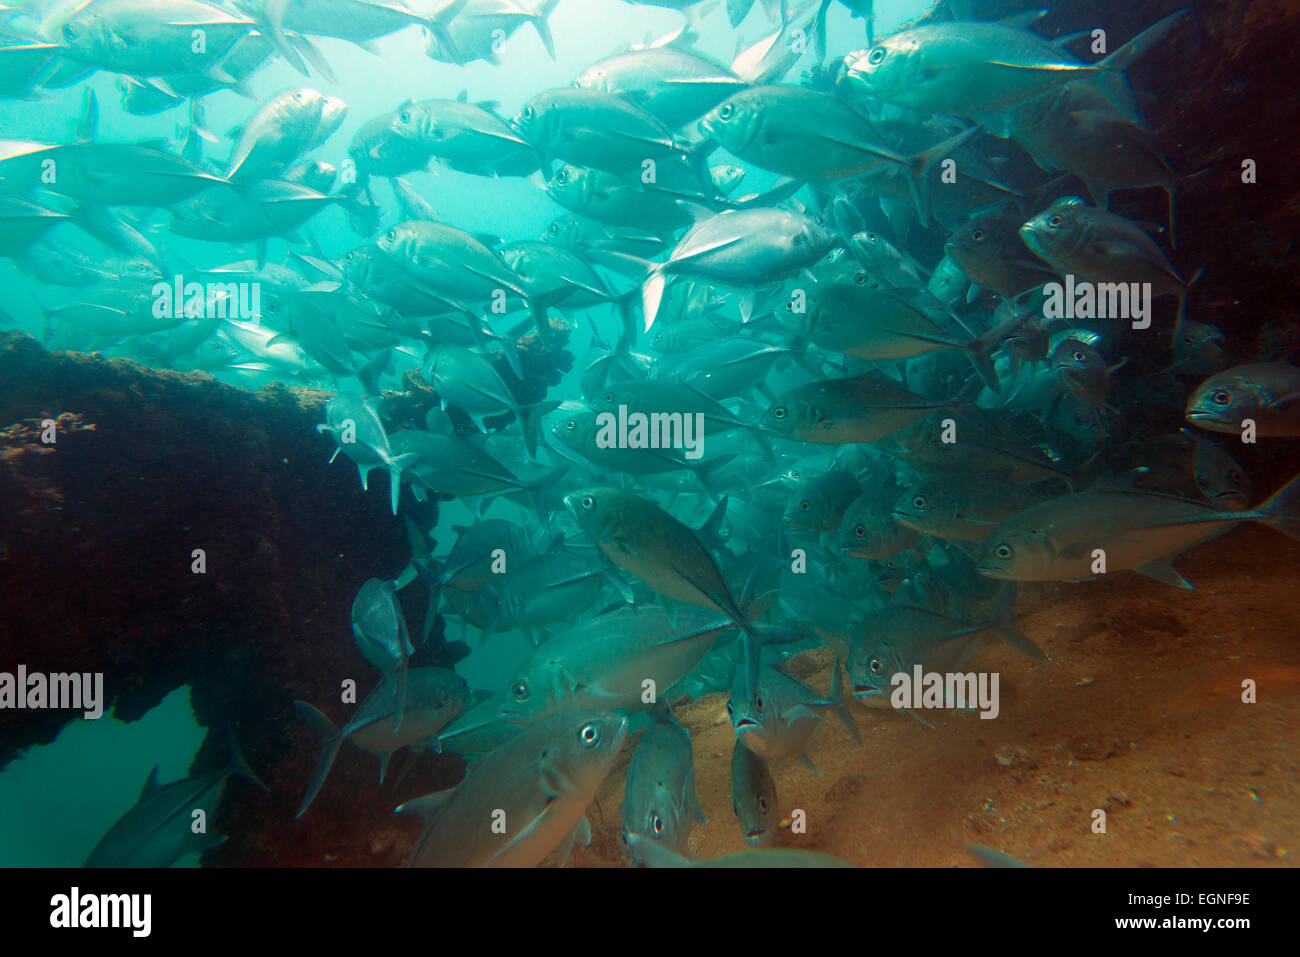 South East Asia, Philippines, Luzon, Subic Bay, jack fish at diving wreck Stock Photo